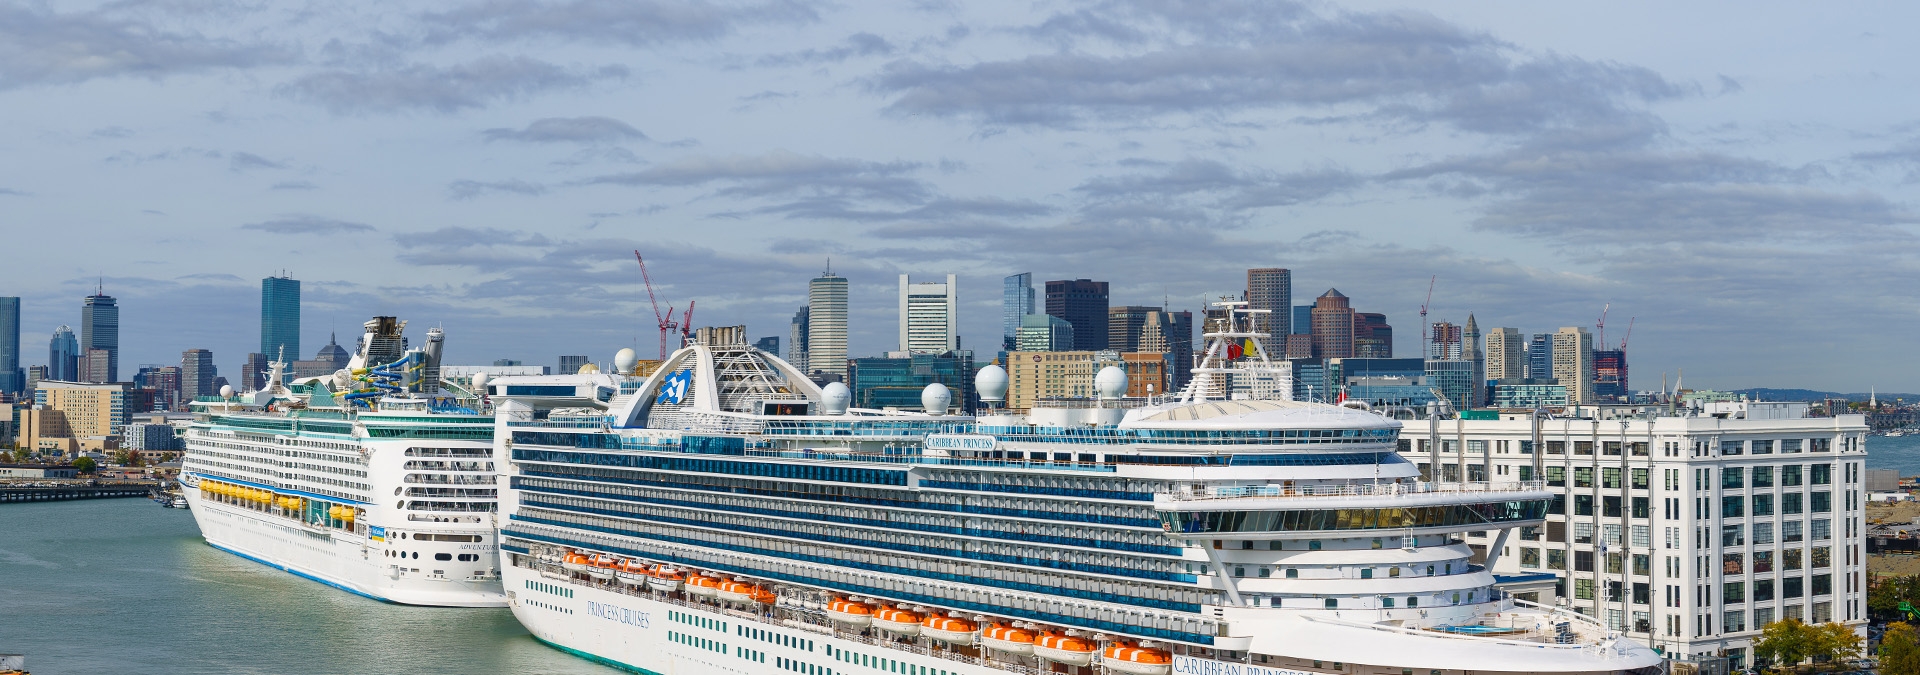 Cruise ships with city in background